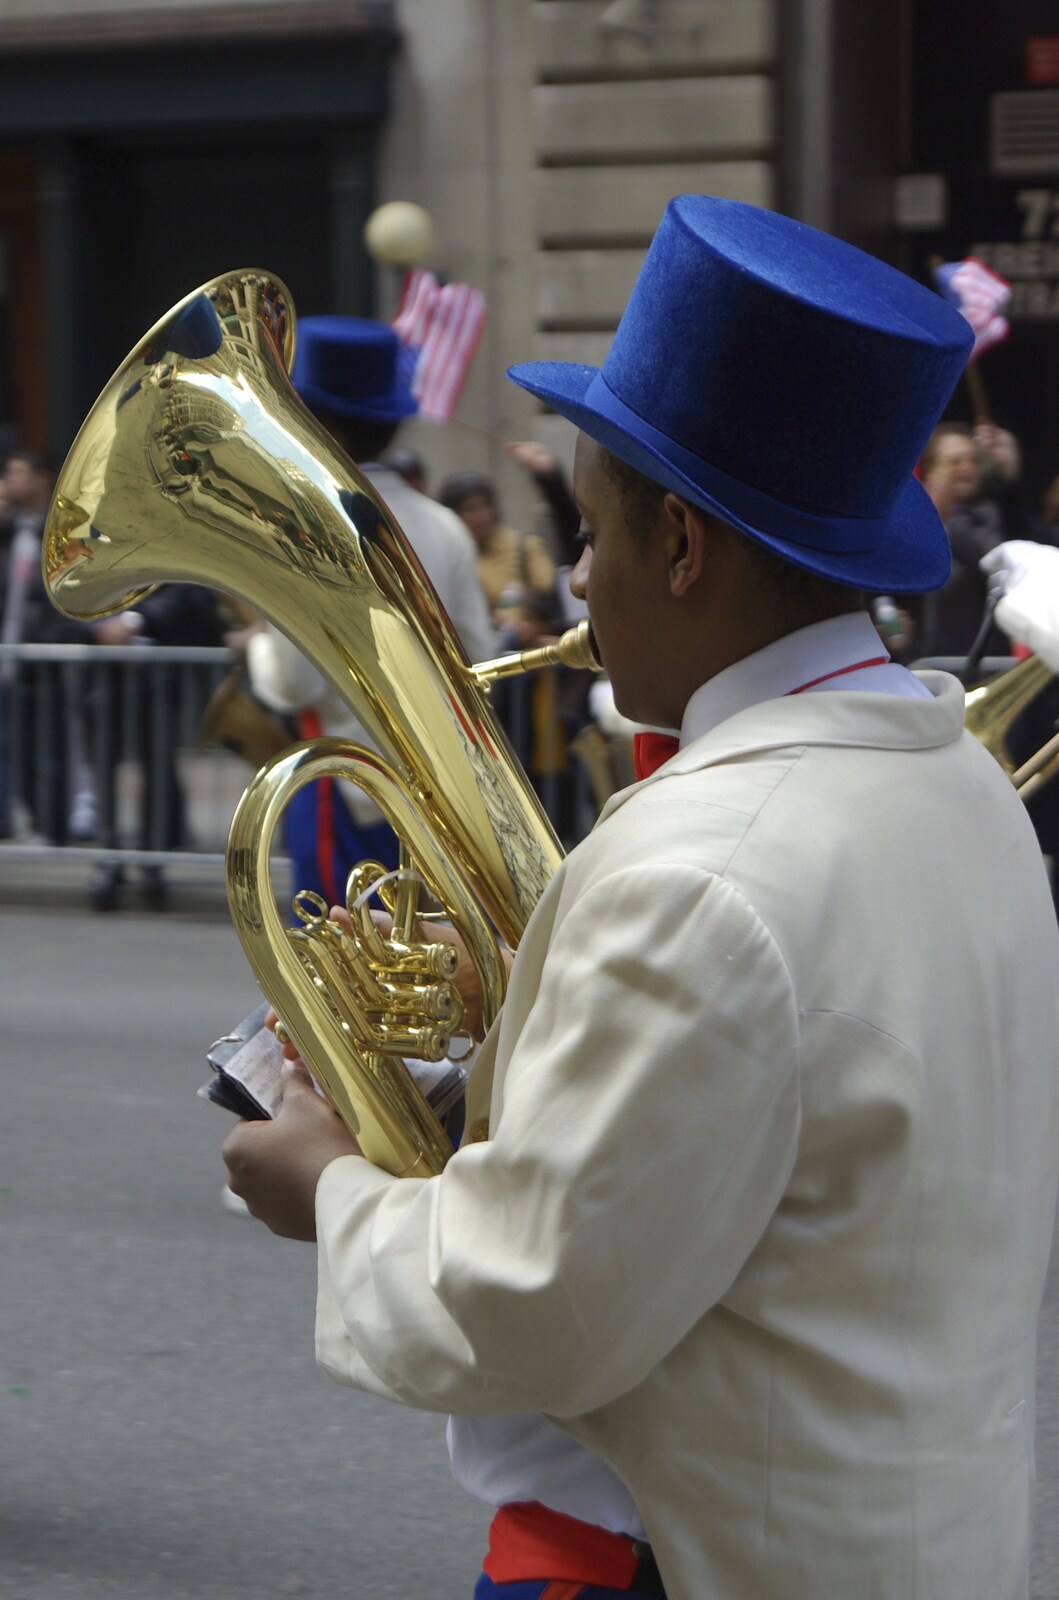 Persian Day Parade, Upper East Side and Midtown, New York, US - 25th March 2007: A kinky horn